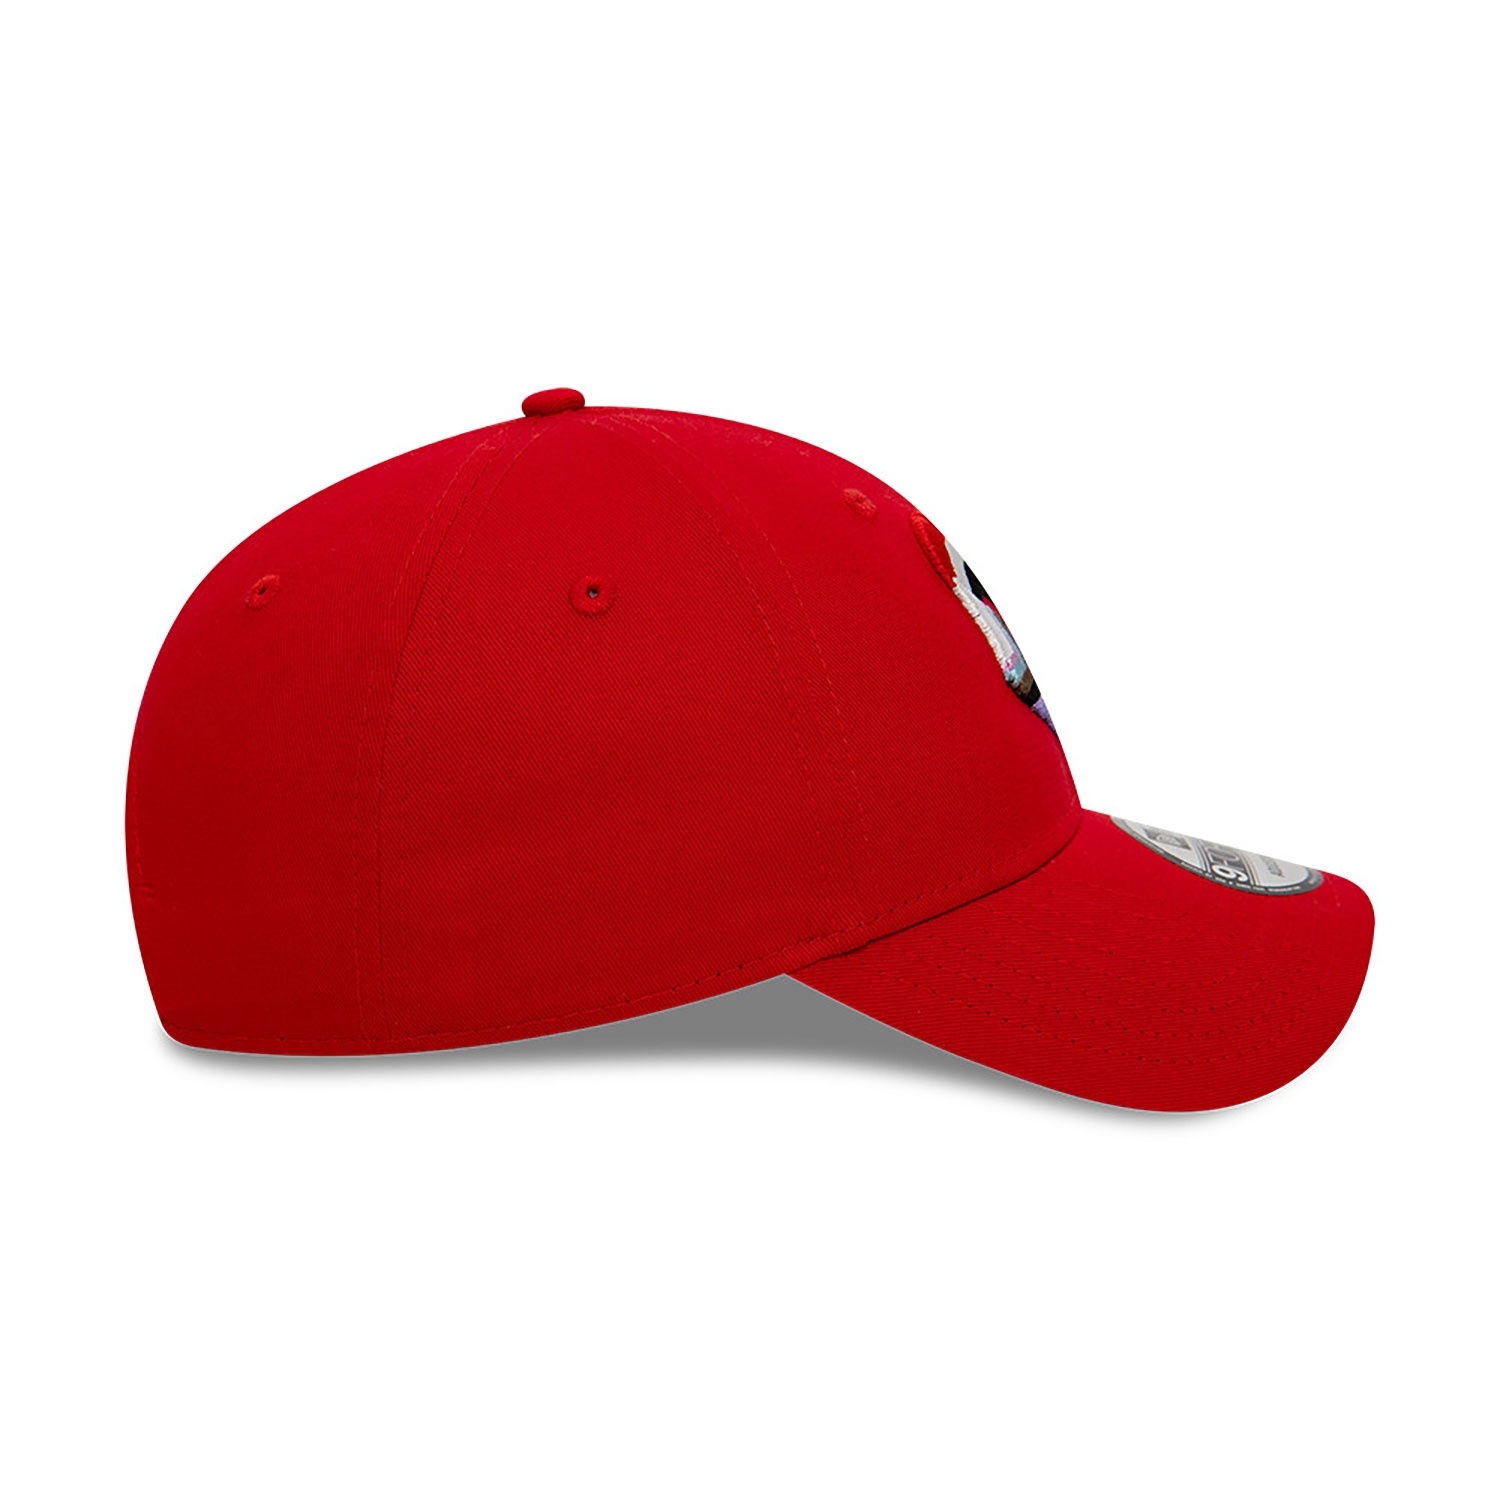 Manchester United One Love Red 9FORTY Adjustable Cap